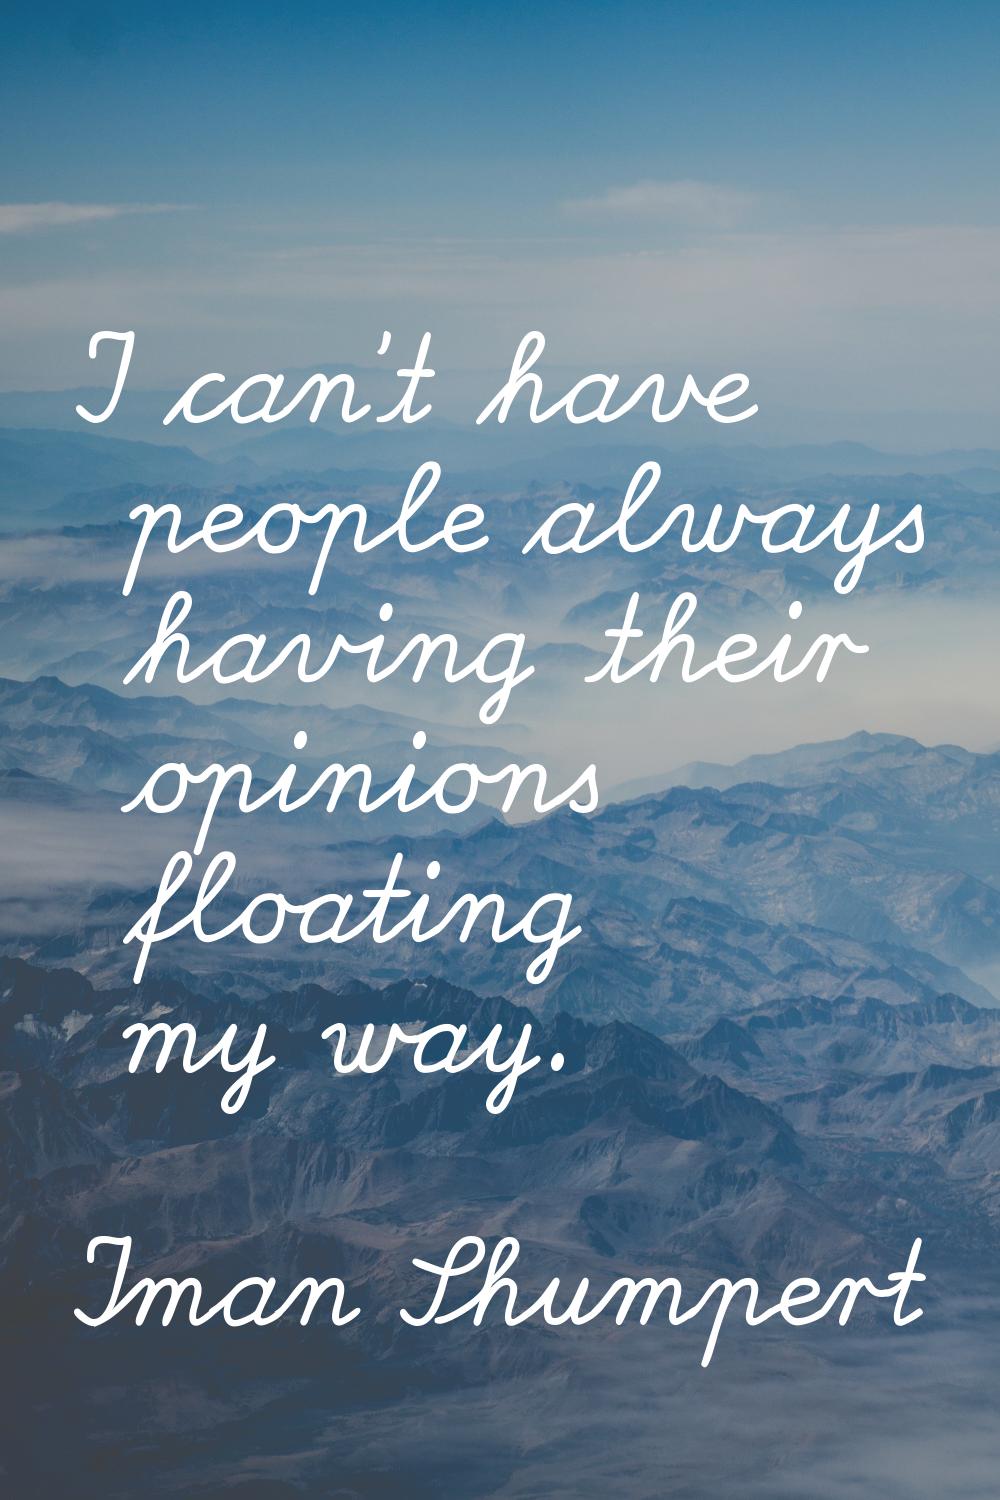 I can't have people always having their opinions floating my way.